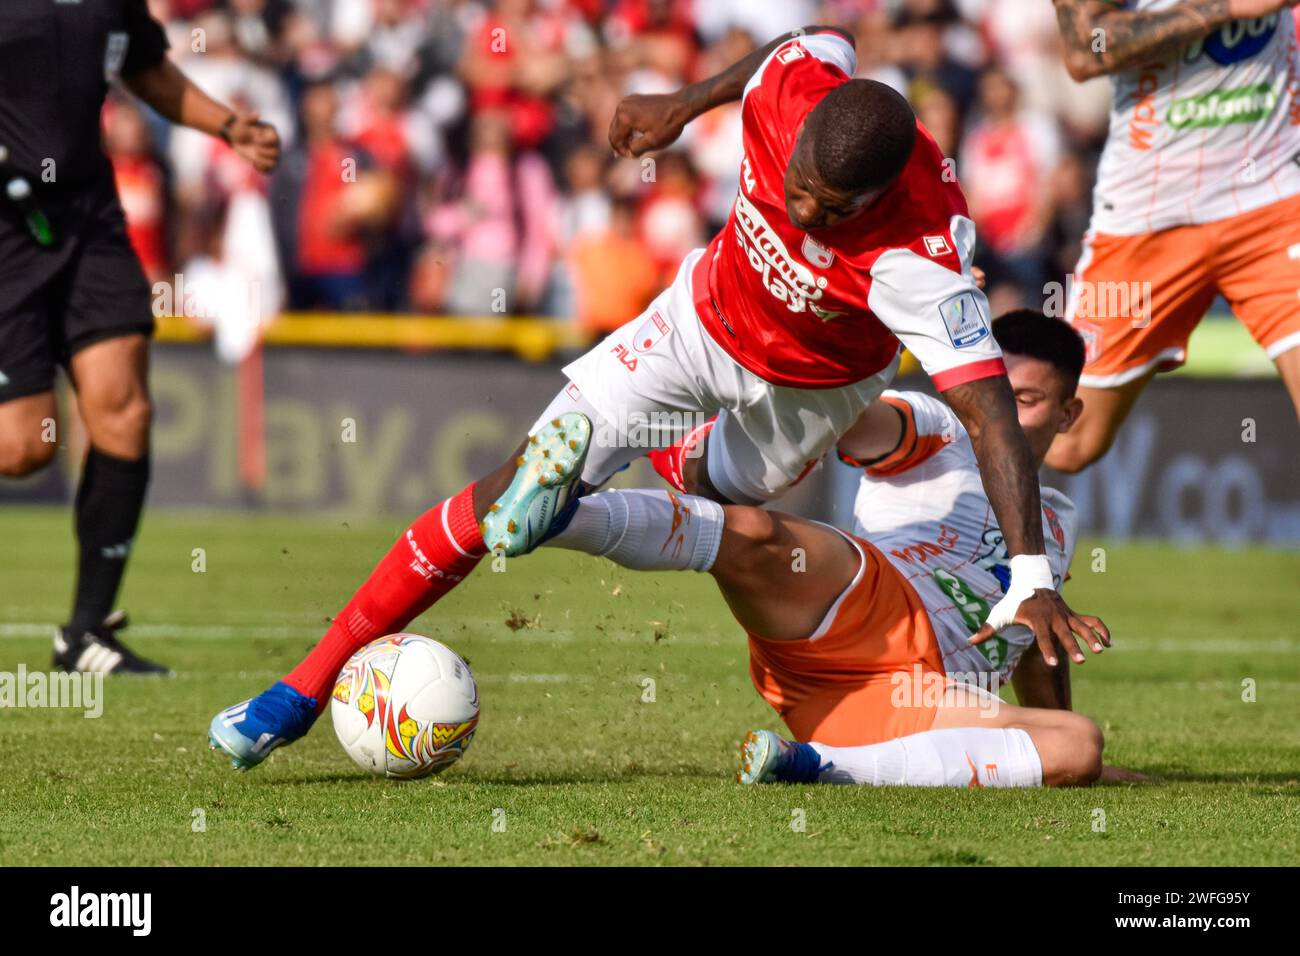 Bogota, Colombia. 27th Jan, 2024. Independiente Santa Fe's Daniel Moreno falls during a ball contest during the BetPlay Dimayor league match between Independiente Santa Fe (3) vs Envigado FC (1) on January 27, 2024, in Bogota, Colombia. Photo by: Cristian Bayona/Long Visual Press Credit: Long Visual Press/Alamy Live News Stock Photo